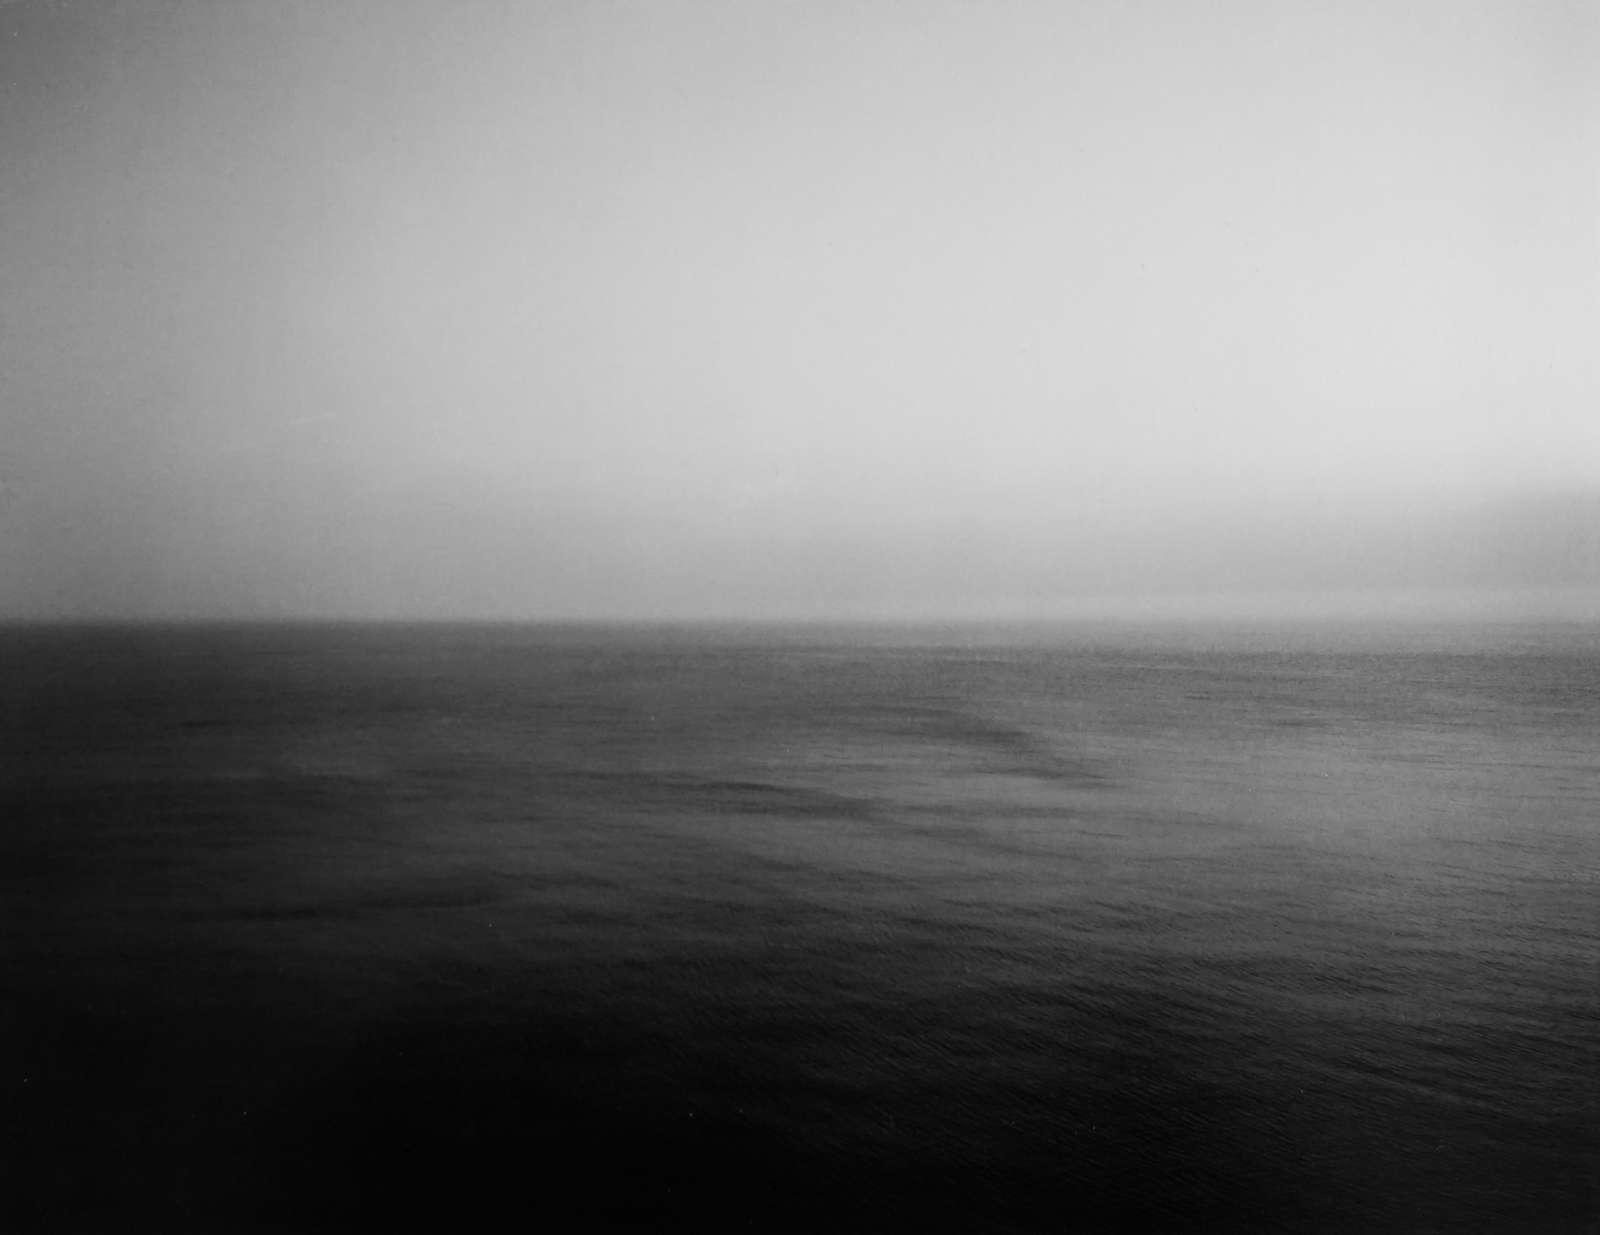 Hiroshi Sugimoto, Sea of Japan, Hokkaido, 305 (from 'Time Exposed' published in 1991), 1986